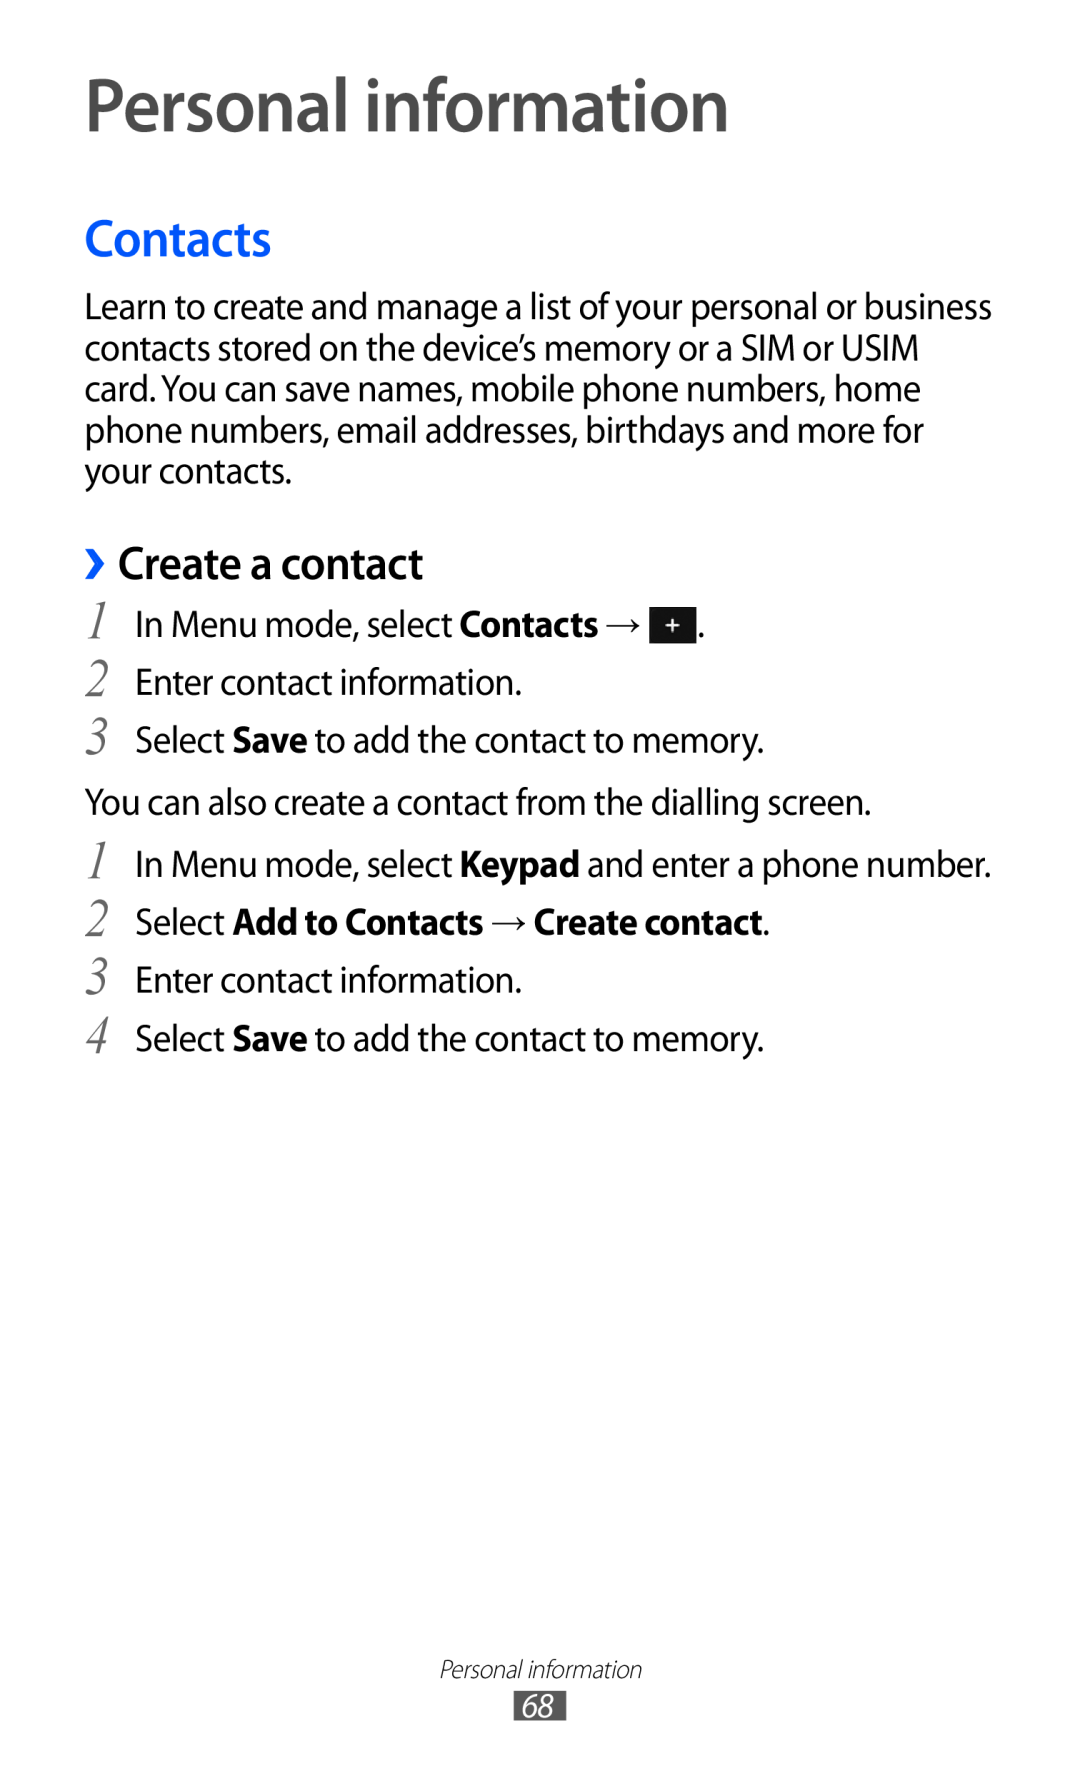 Samsung GT-S5380SSAXEF manual Personal information, ››Create a contact, Select Add to Contacts → Create contact 